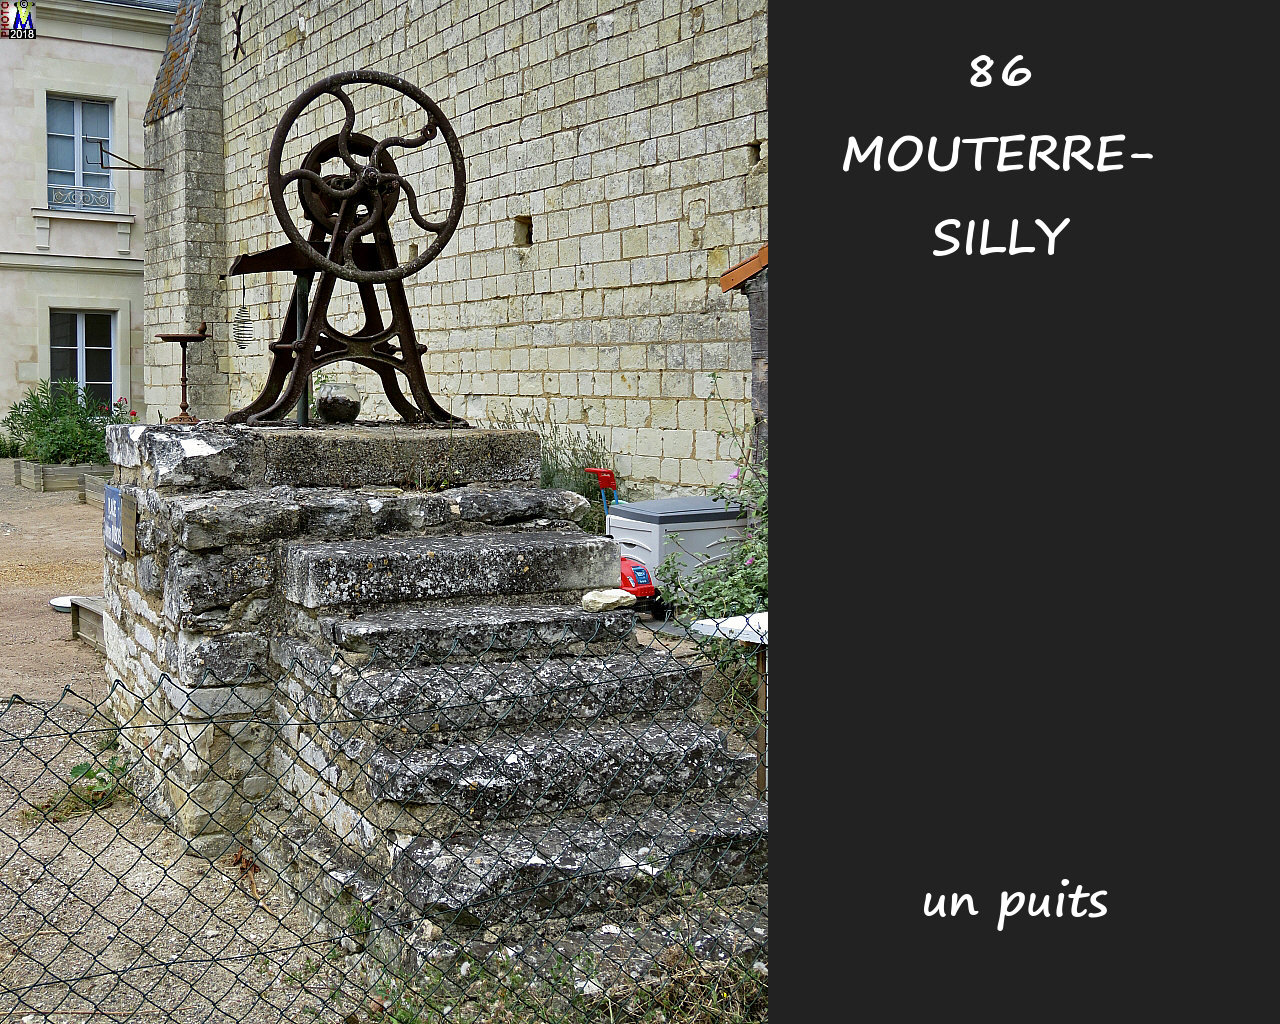 86MOUTERRE-SILLY_puits_1000.jpg